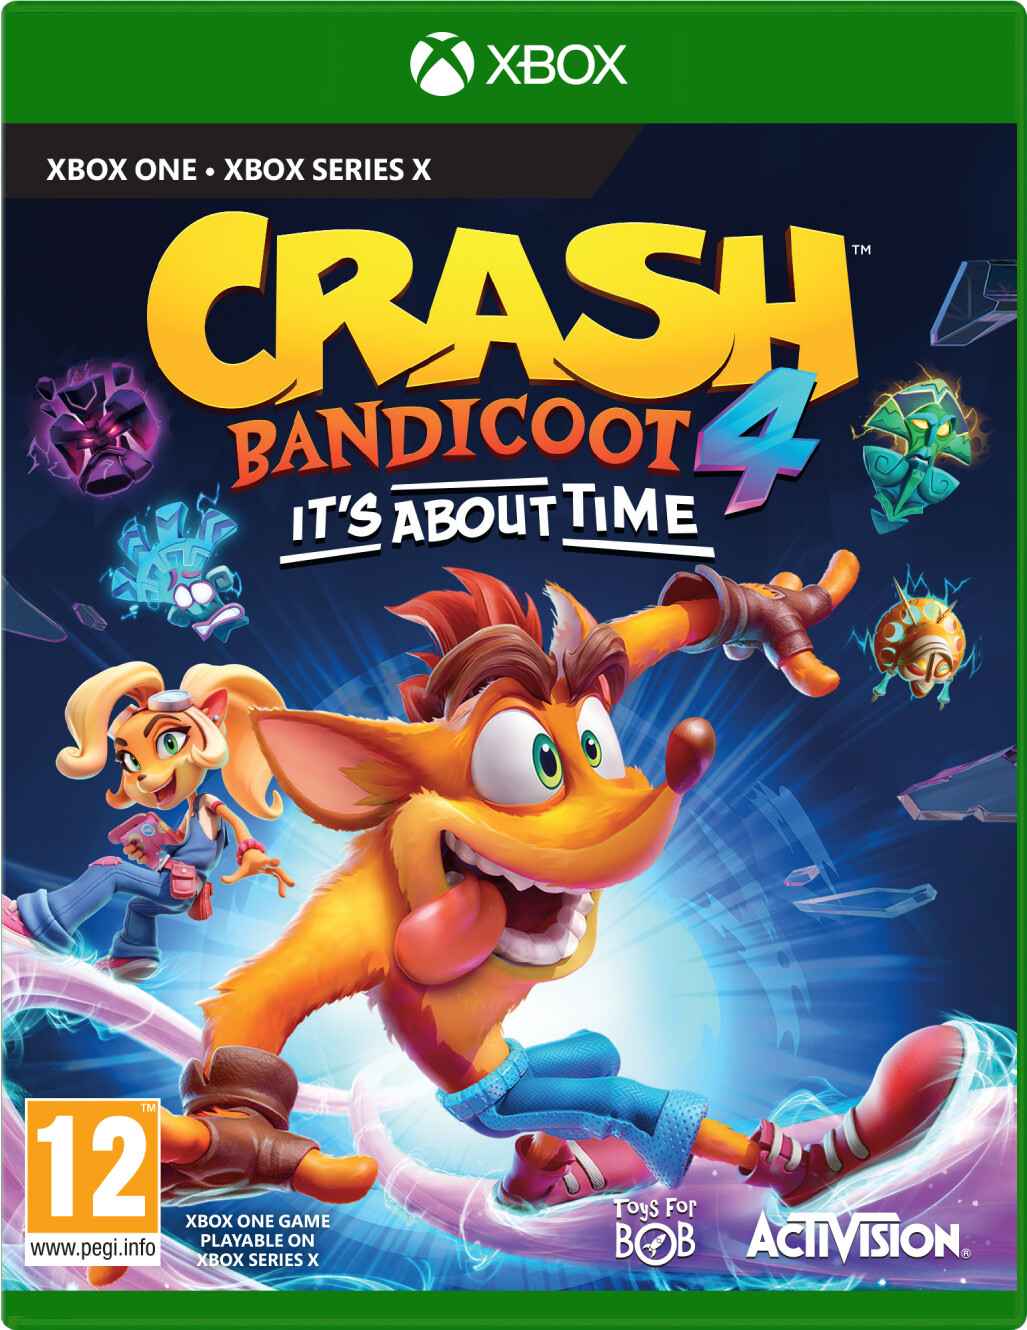 Photos - Game Blizzard Activision  Crash Bandicoot 4: It's About Time  (Xbox One)